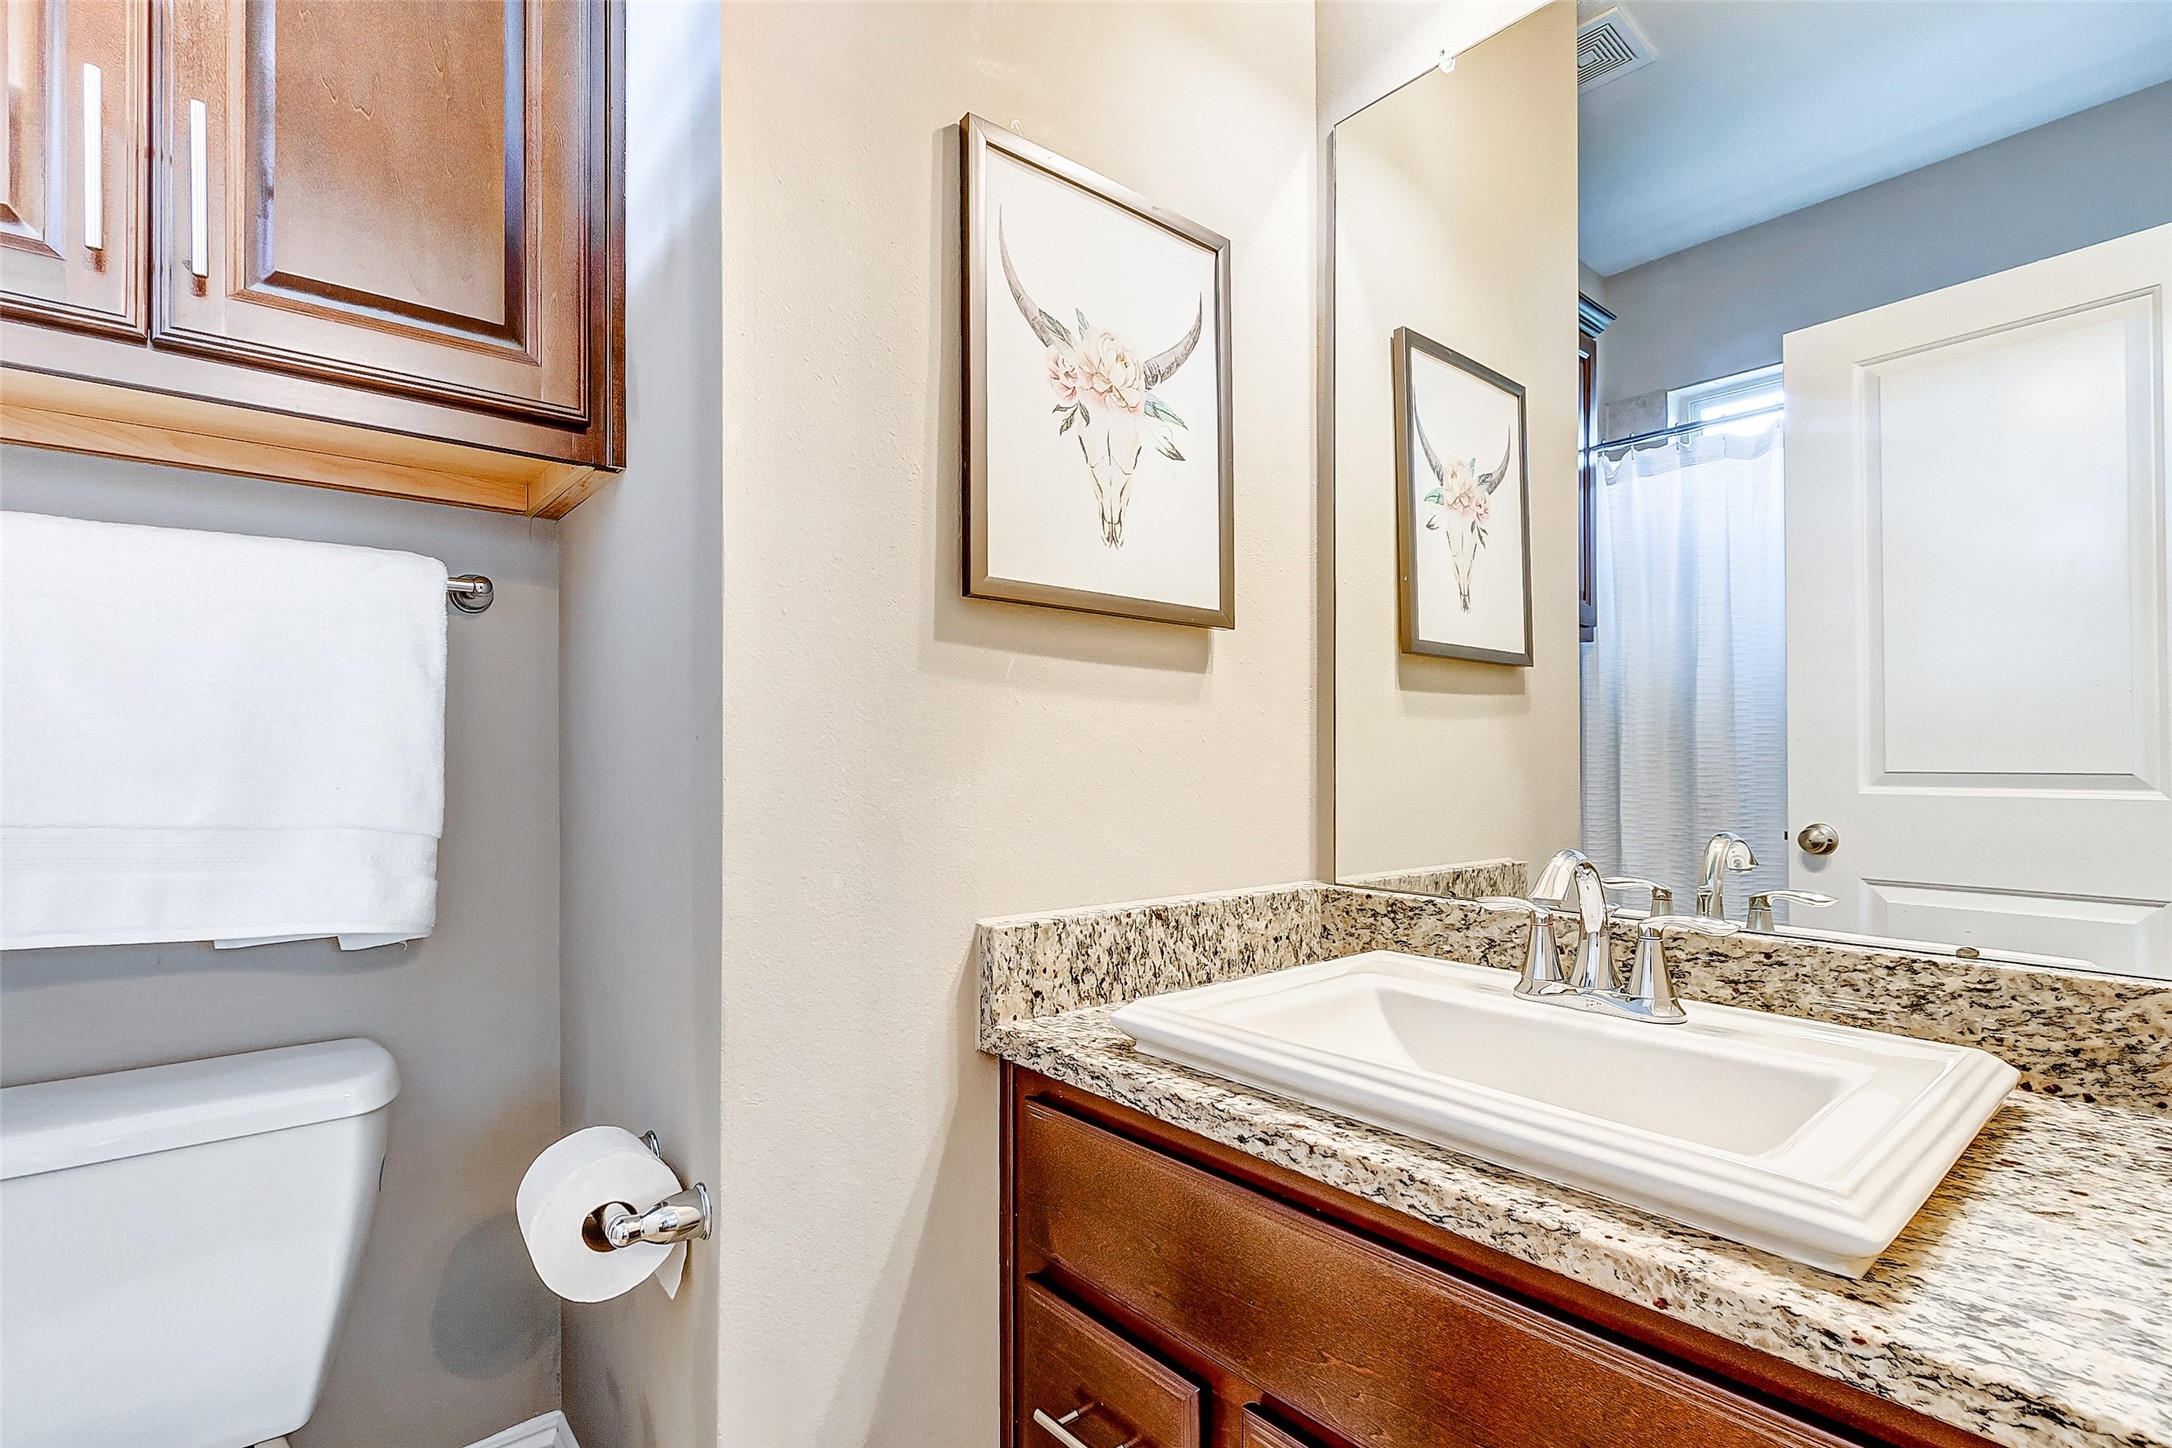 The third floor secondary bathroom boasts granite counters, neutral paint, rich cabinetry, brushed nickel pulls, and tub/shower combo.